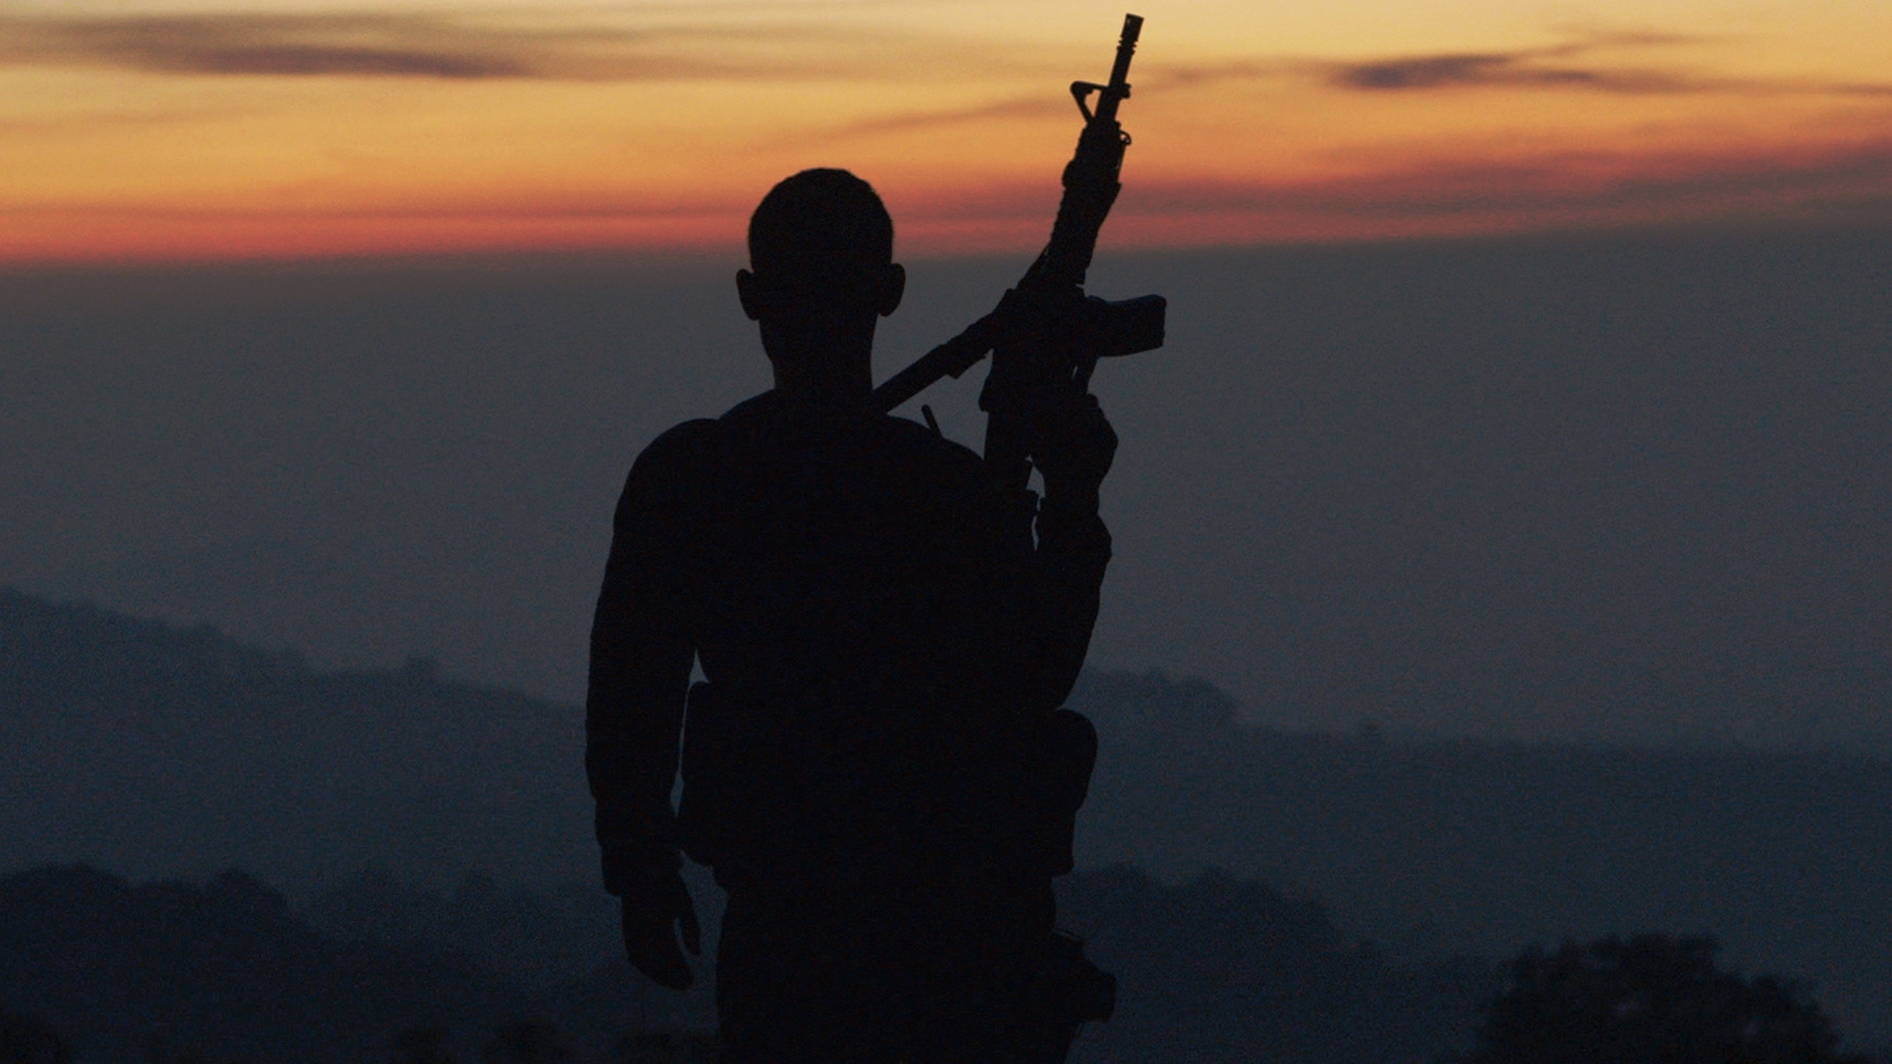 #1 - Autodefensa member standing guard in Michoacán, Mexico, from CARTEL LAND, a film by Matthew Heineman.jpg